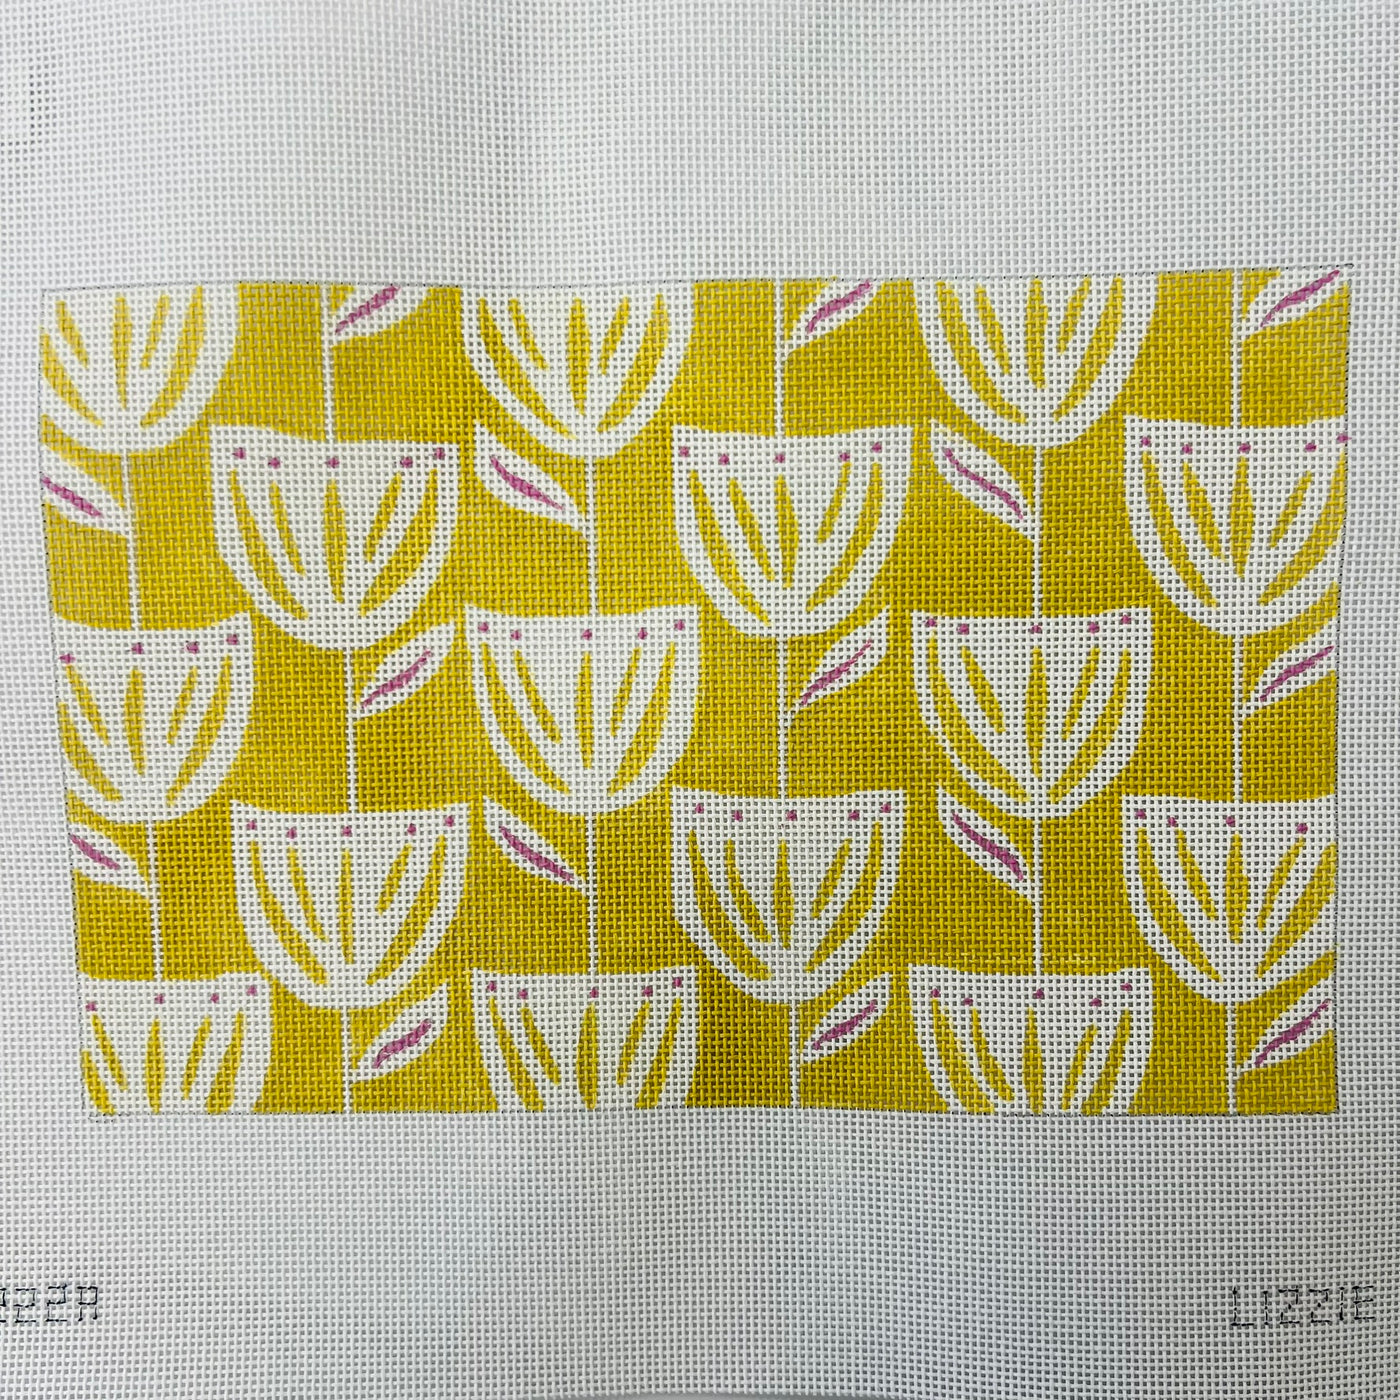 Tulips on Gold Clutch Needlepoint Canvas